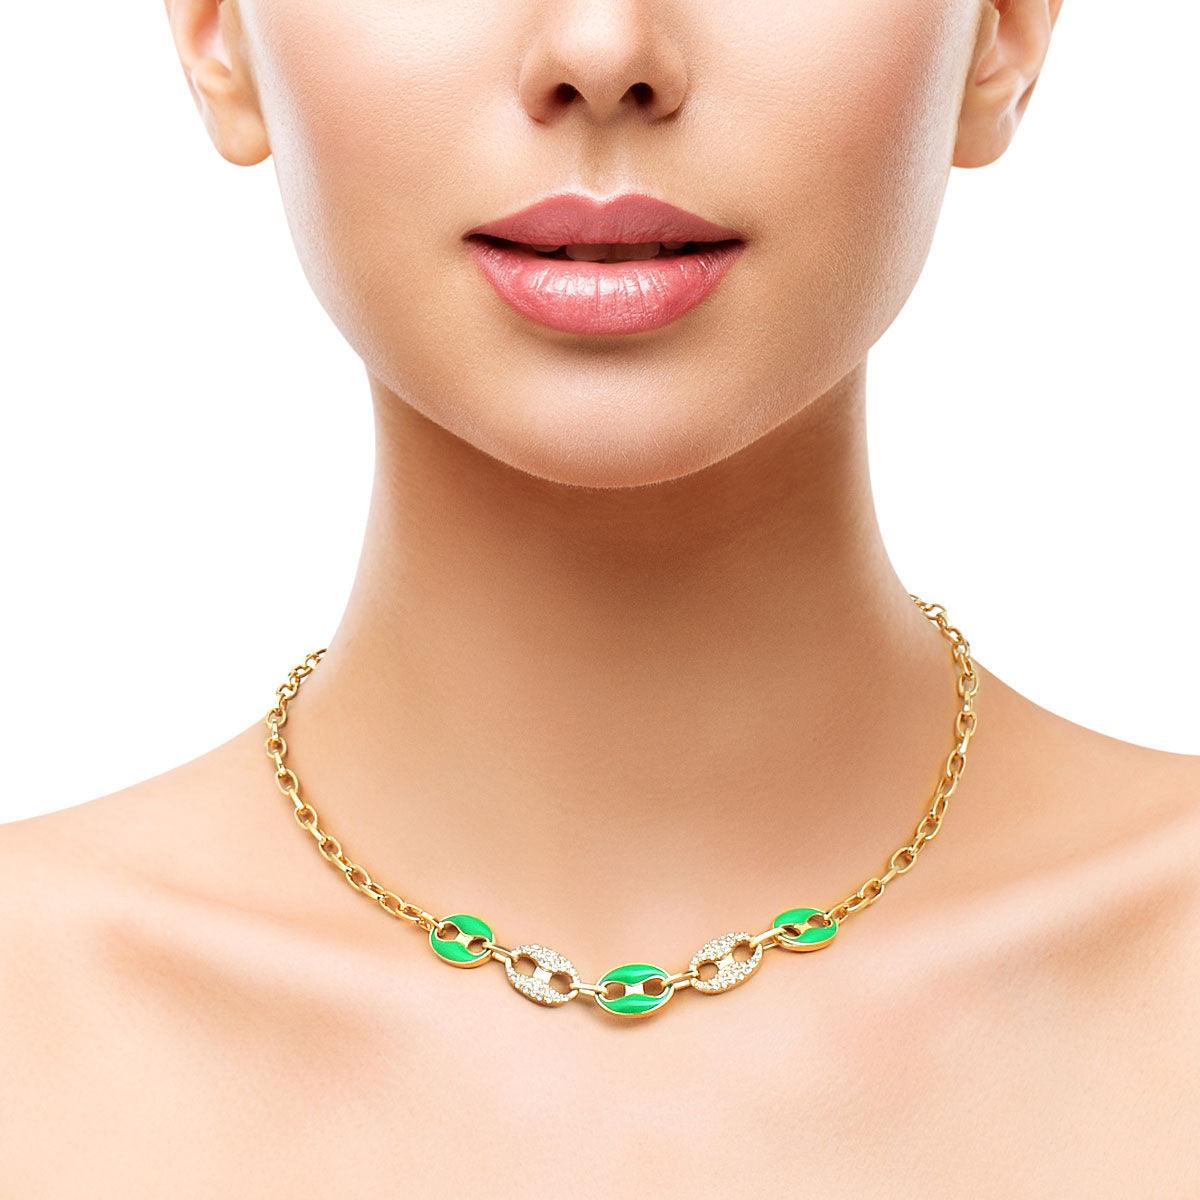 Stunning Green & Gold Matelot Chain Necklace - Grab Yours Today!